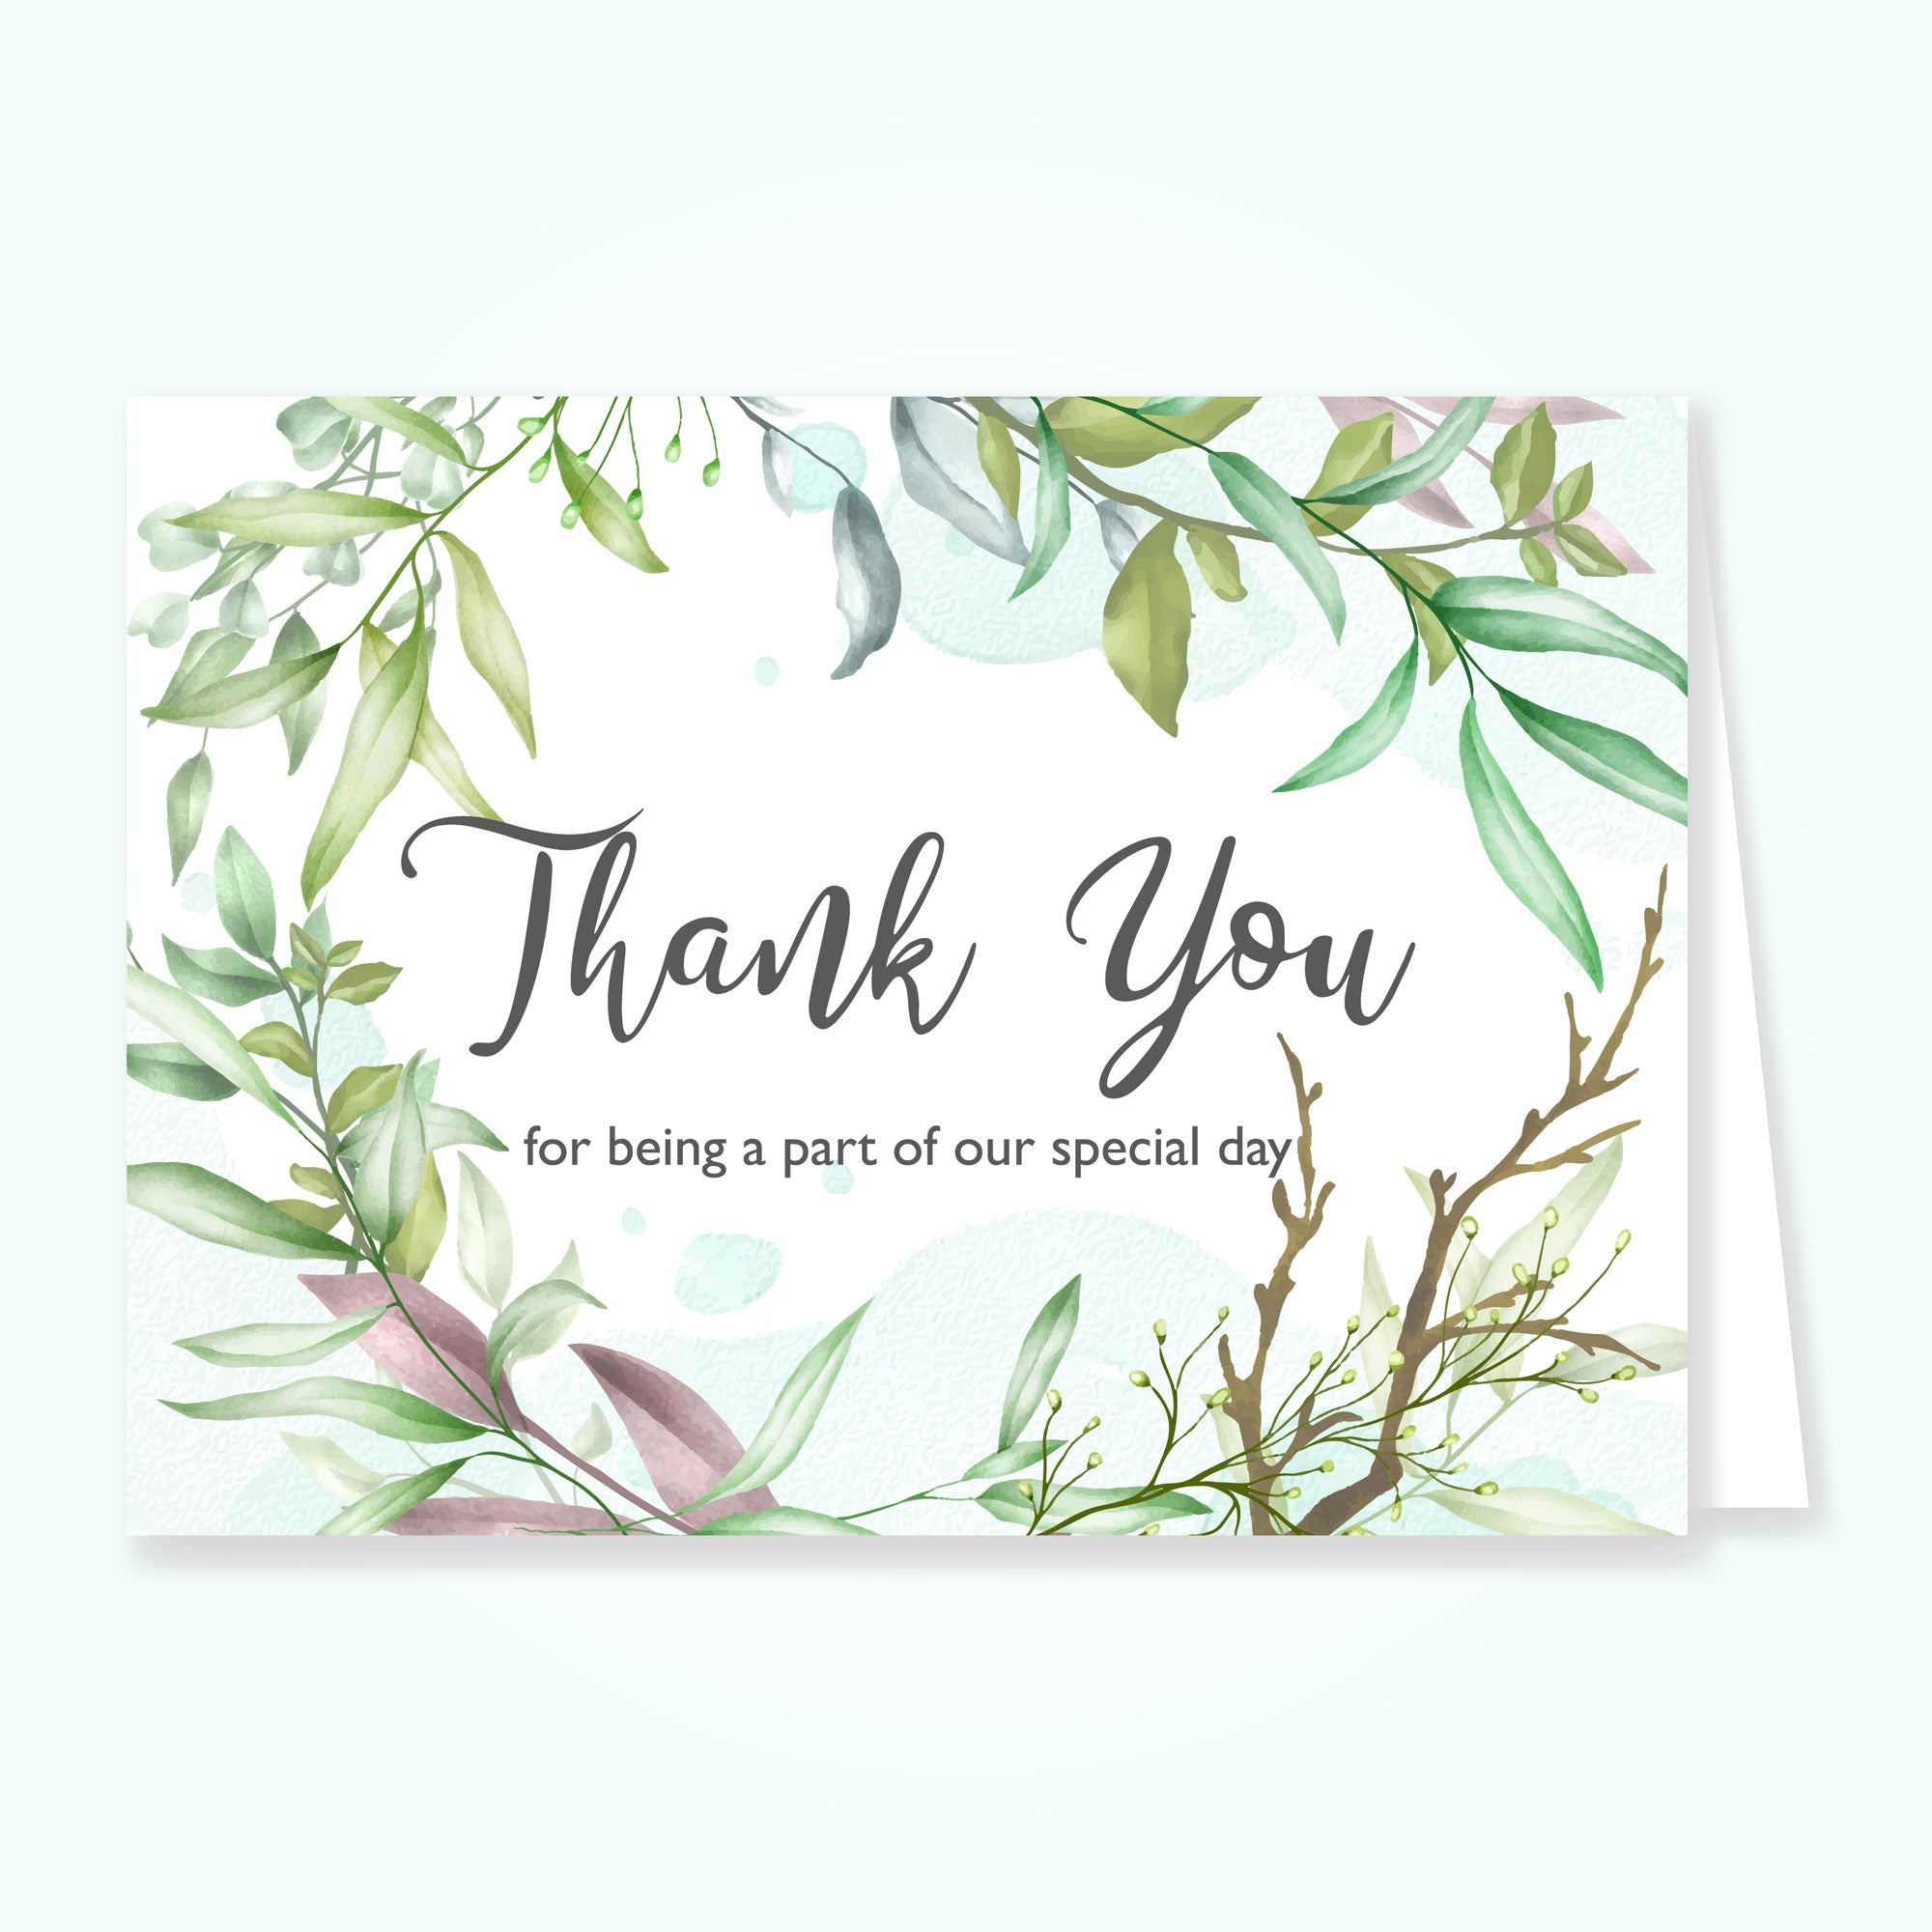 Plantable Lush Leaves Thank You Cards - Set of 100